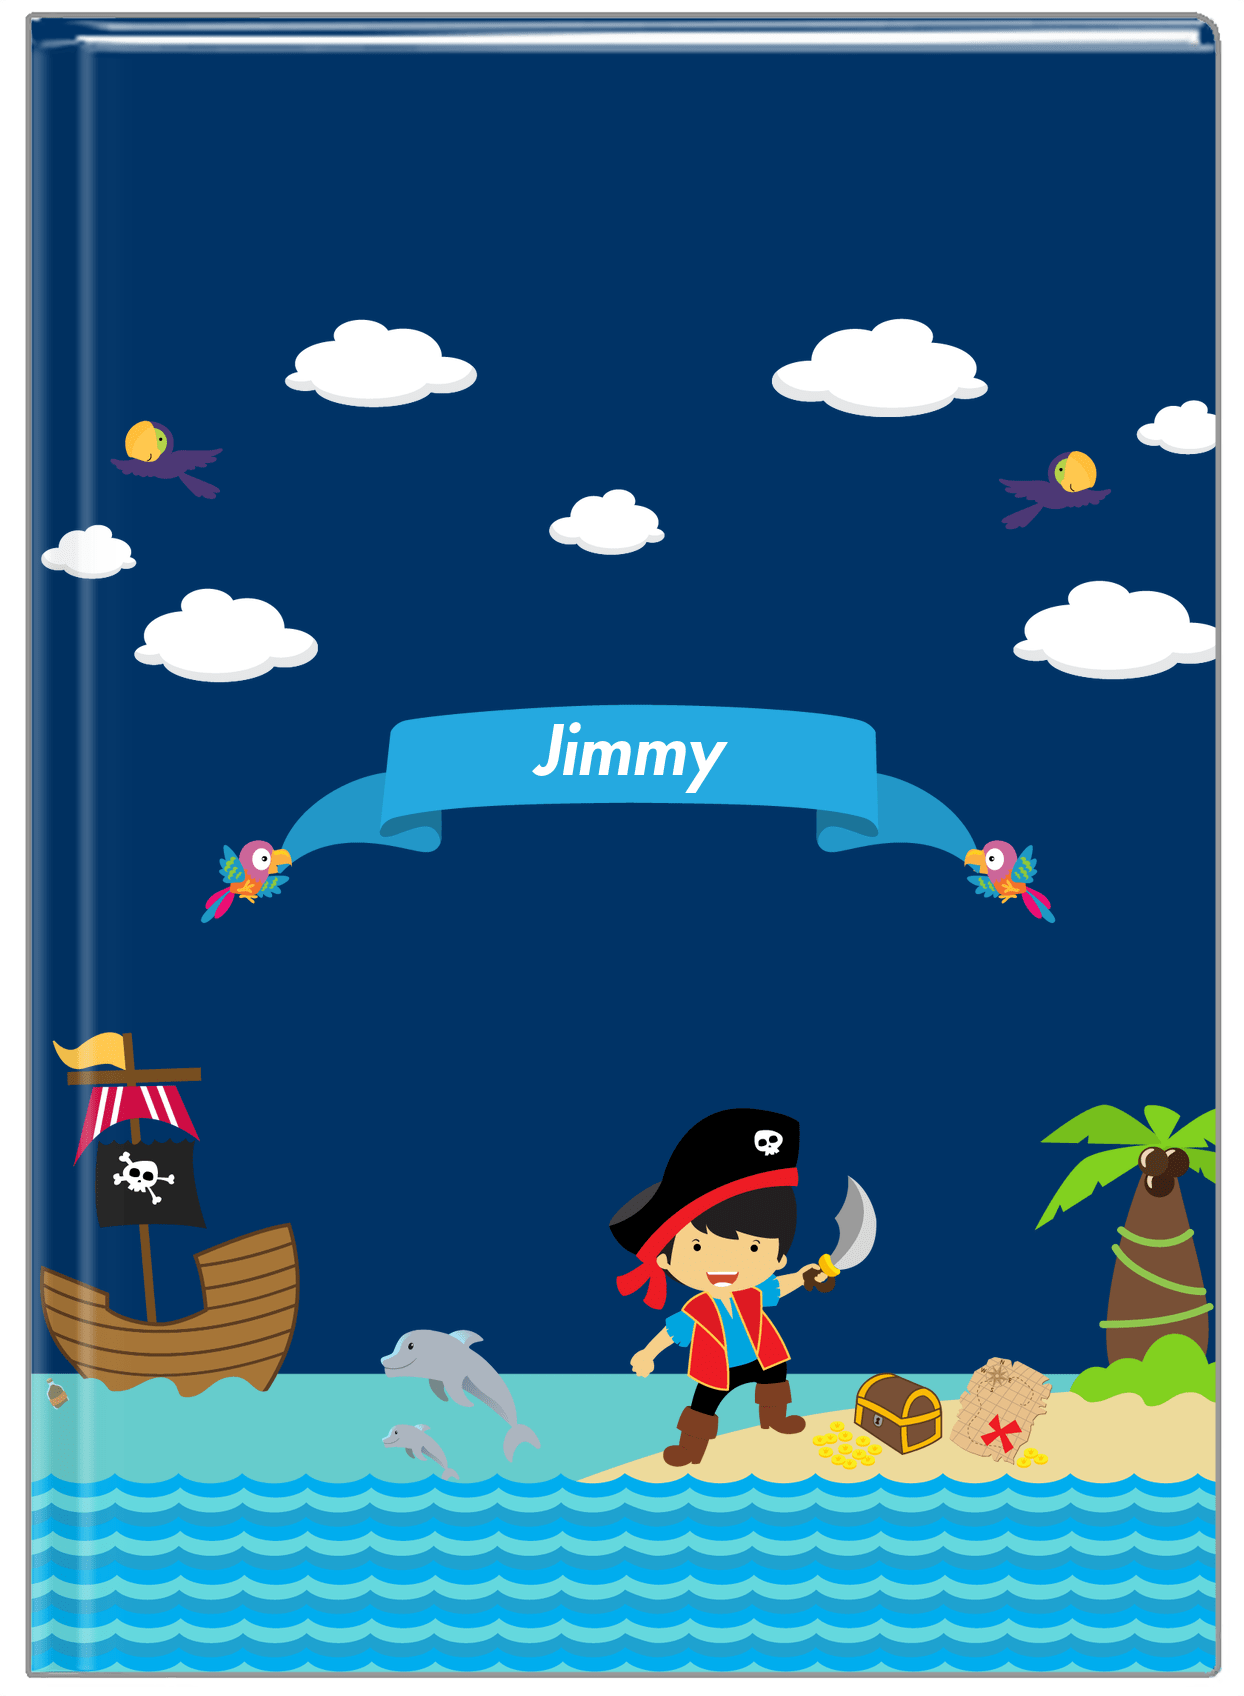 Personalized Pirate Journal IV - Boy Pirate with Sword - Asian Boy - Front View